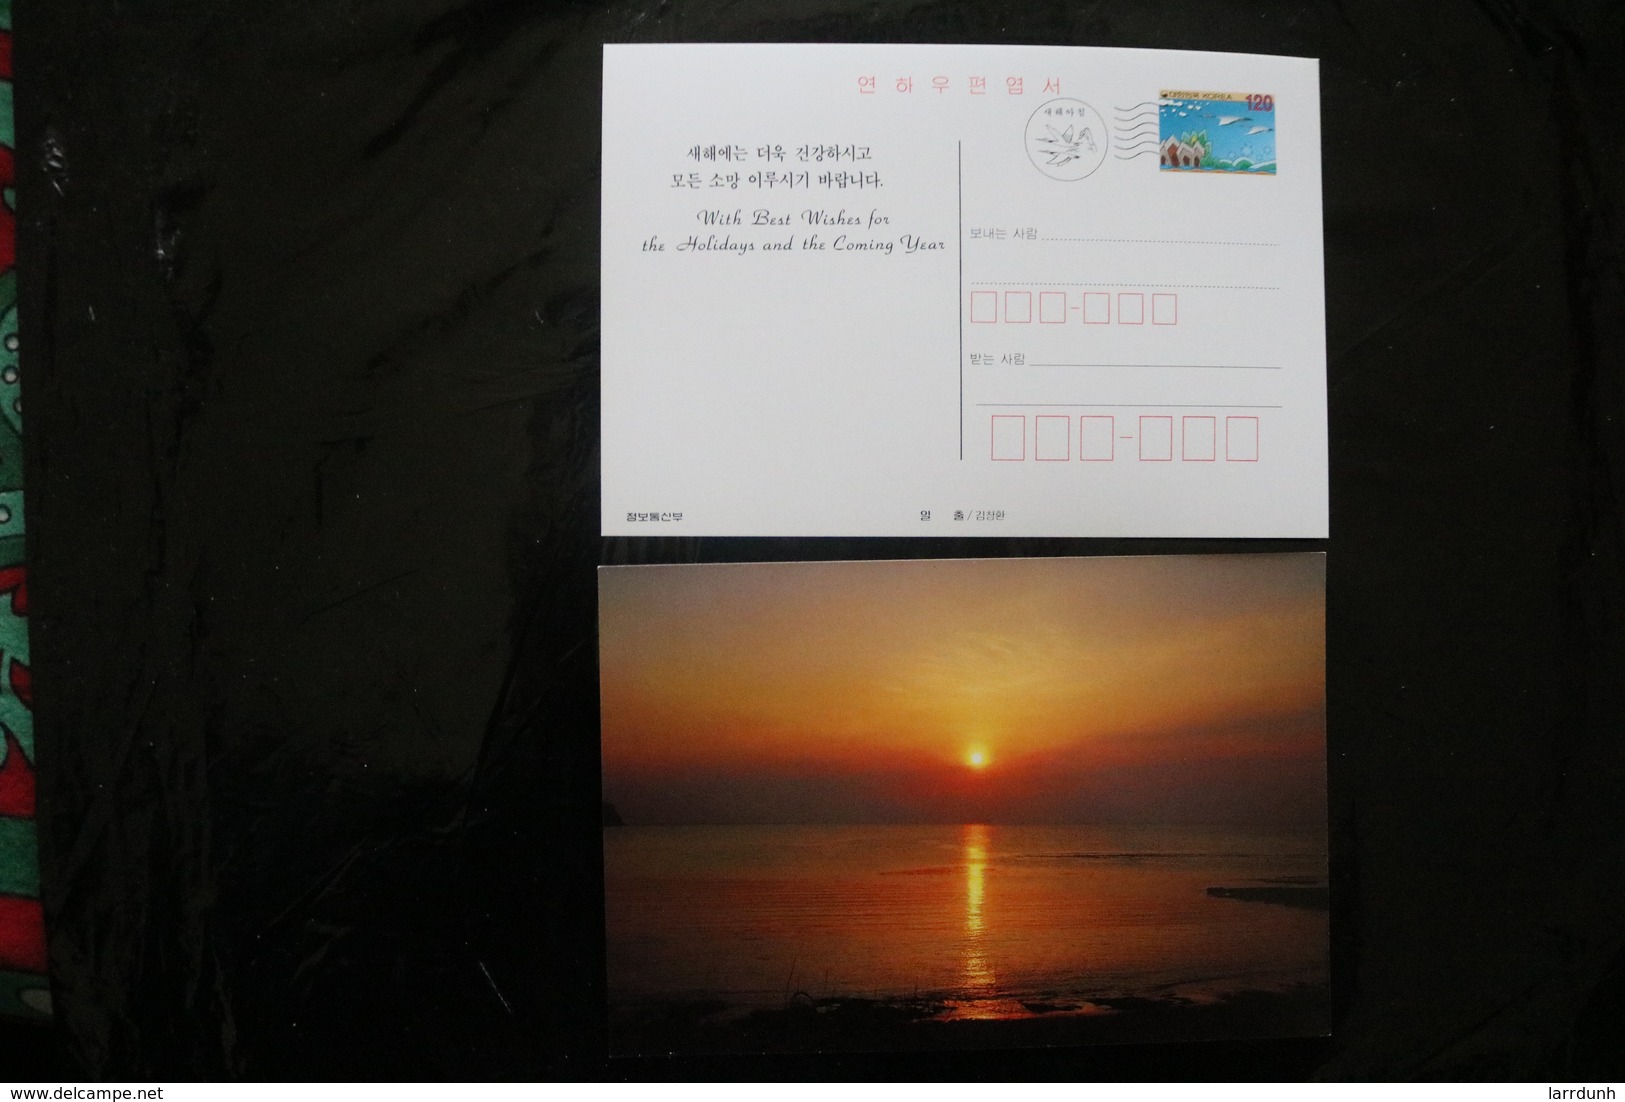 Korea Crane Stamped Card New Year Greetings Water And Sunset A04s - Korea, South